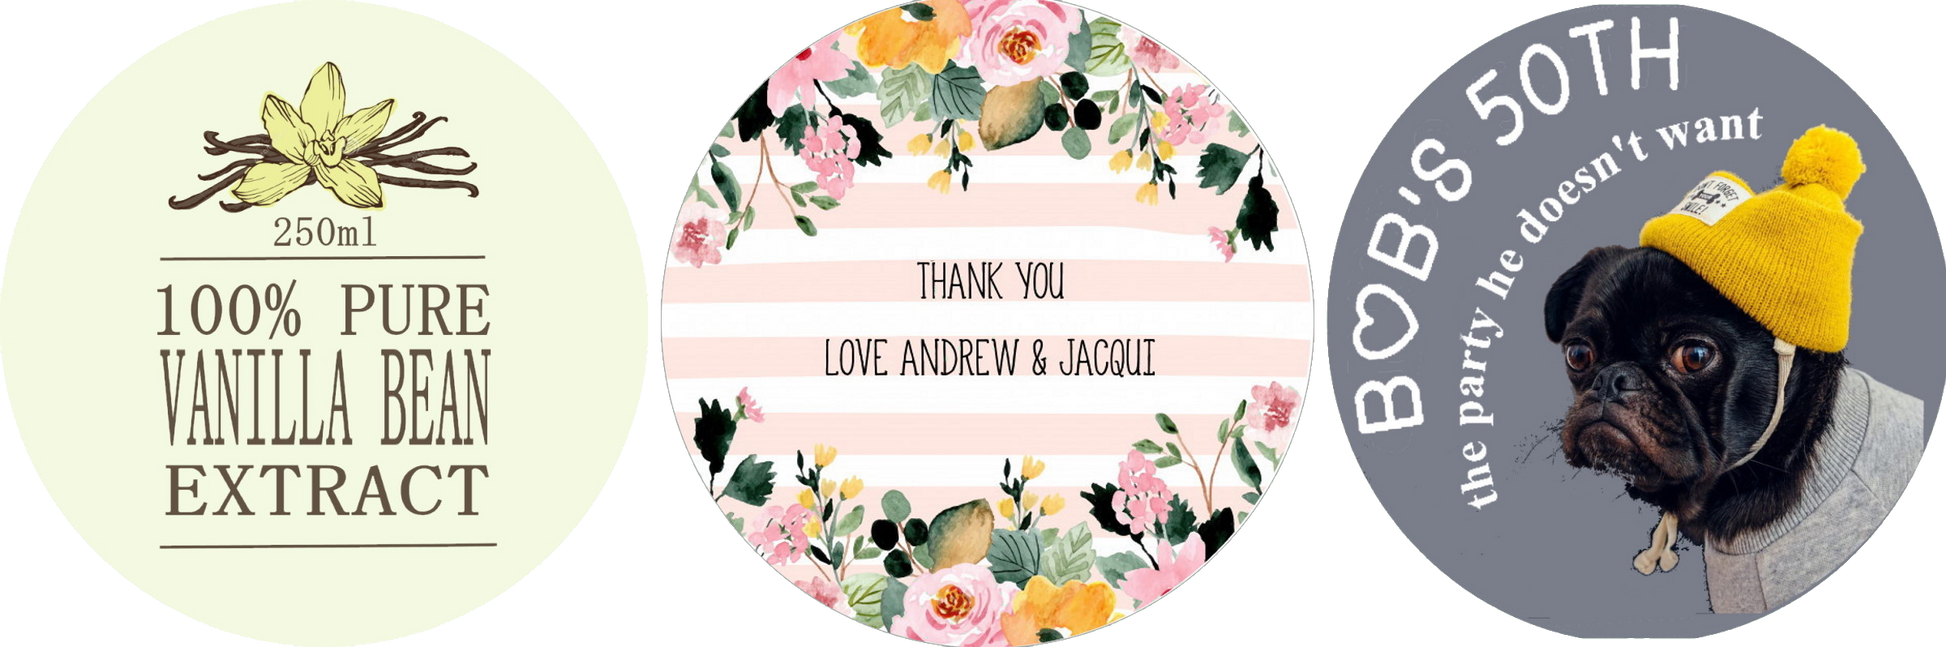 examples of round photo and logo stickers by Little Sticker Co